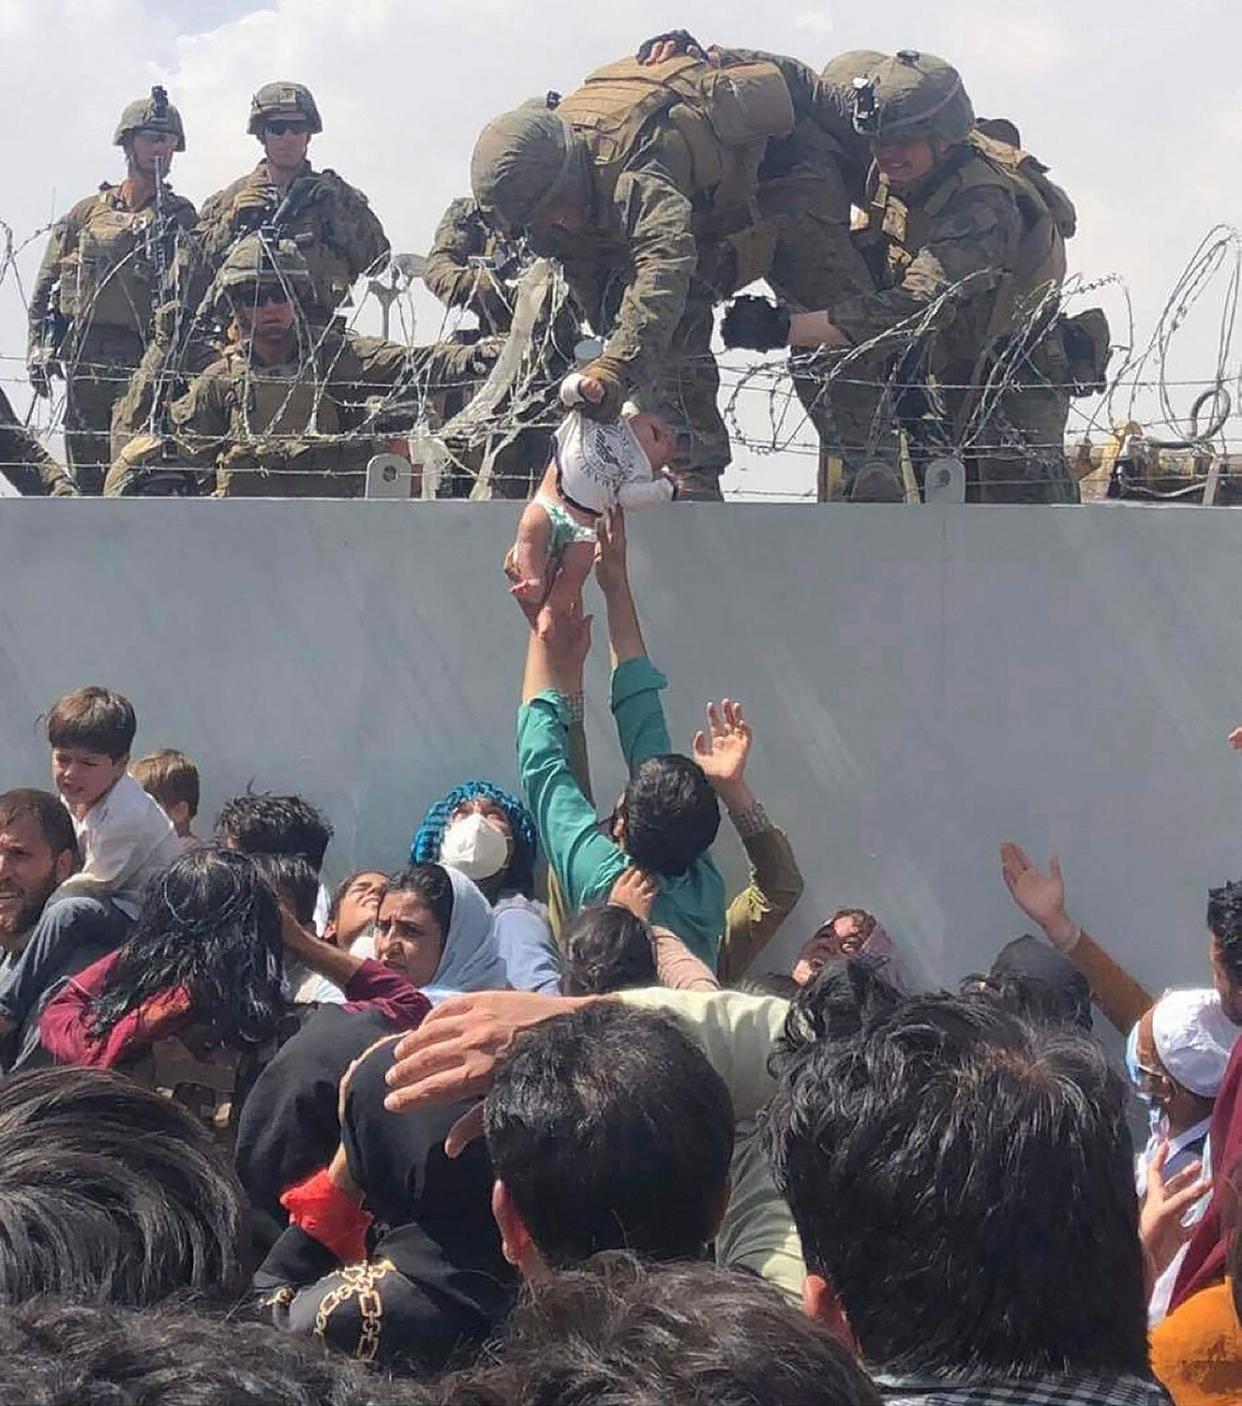 Afghan baby handed to Marine over fence